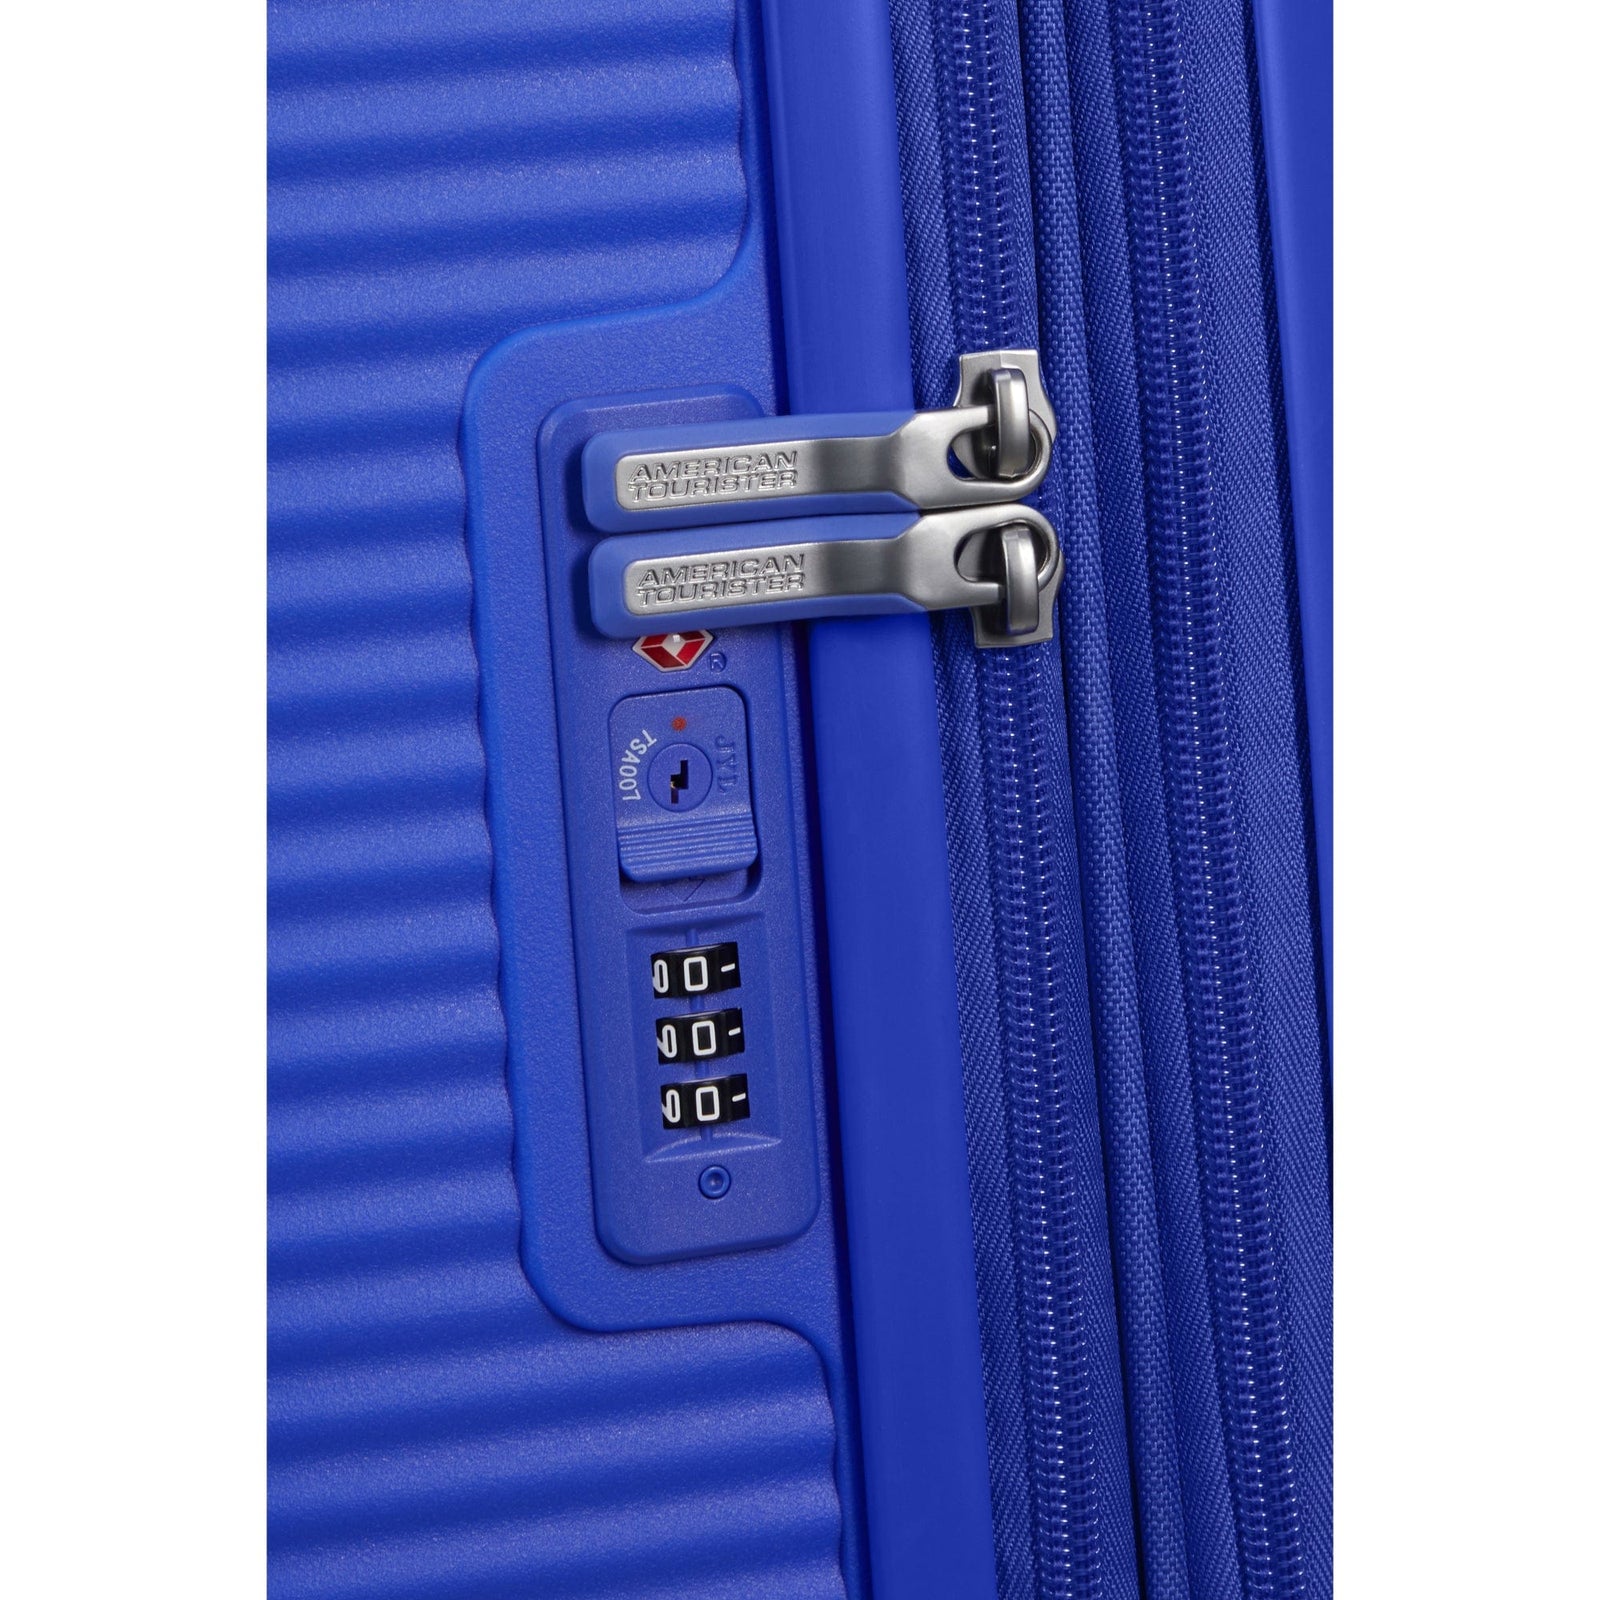 American Tourister SoundBox 77cm Large Check-in in Colbat Blue